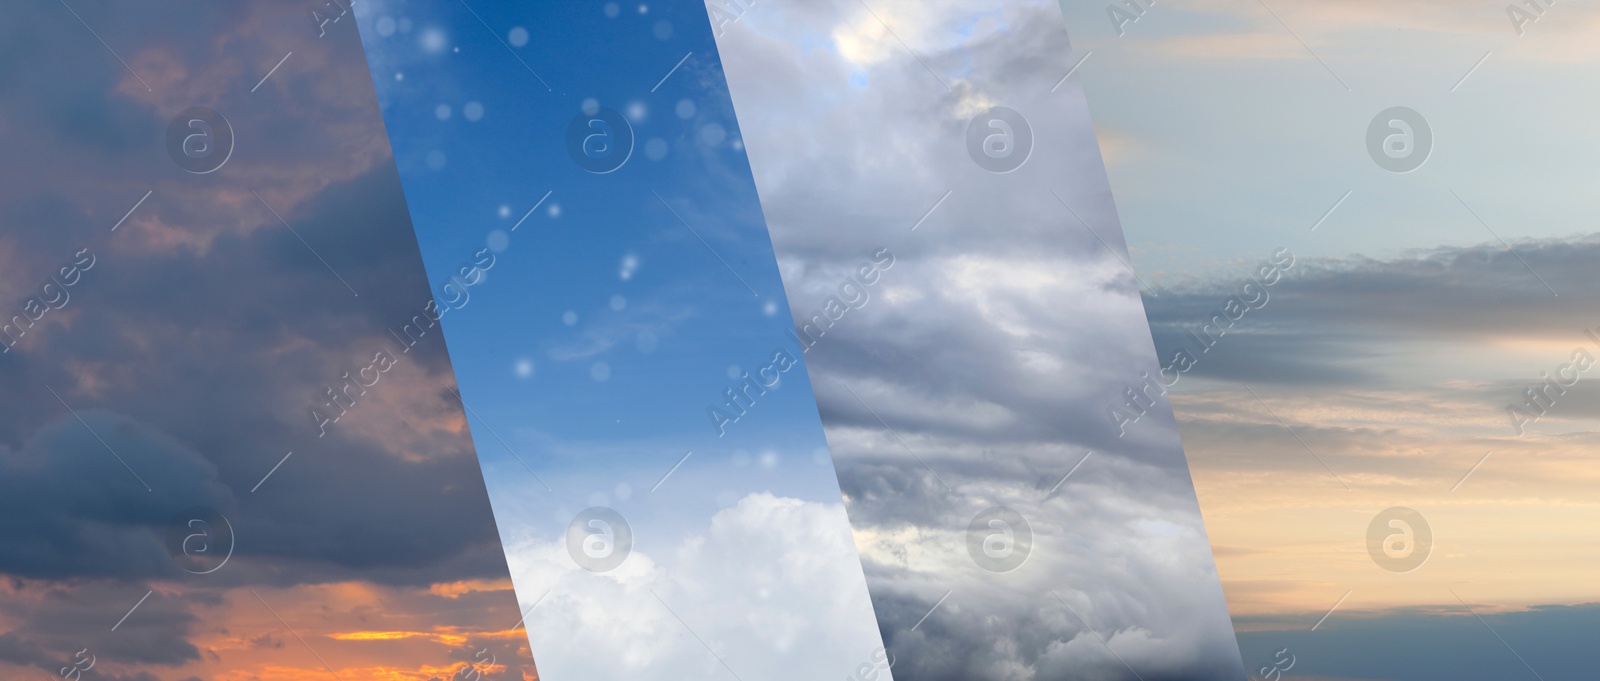 Image of Different weather conditions due to season changing, banner design. Collage with photos of sky